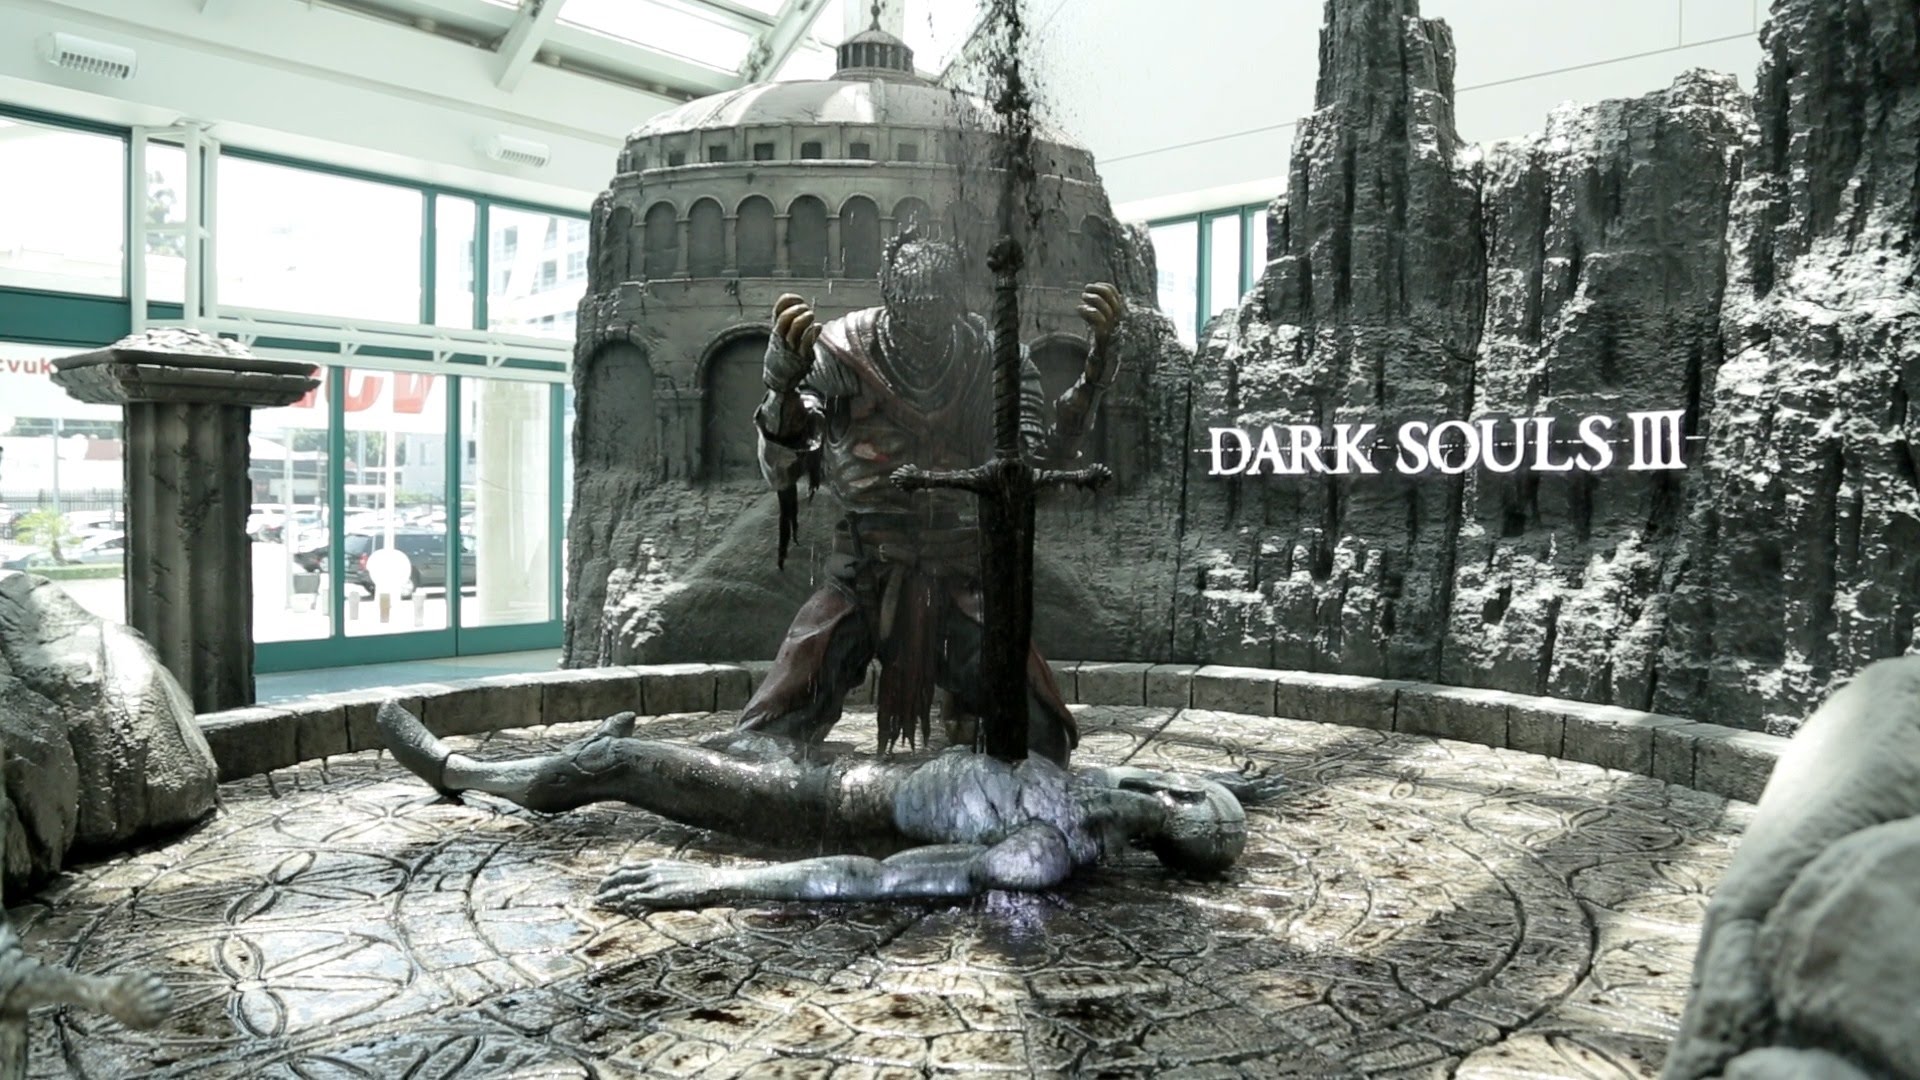 This Dark Souls Statue Is the Most Disgusting Thing at E3 - YouTube